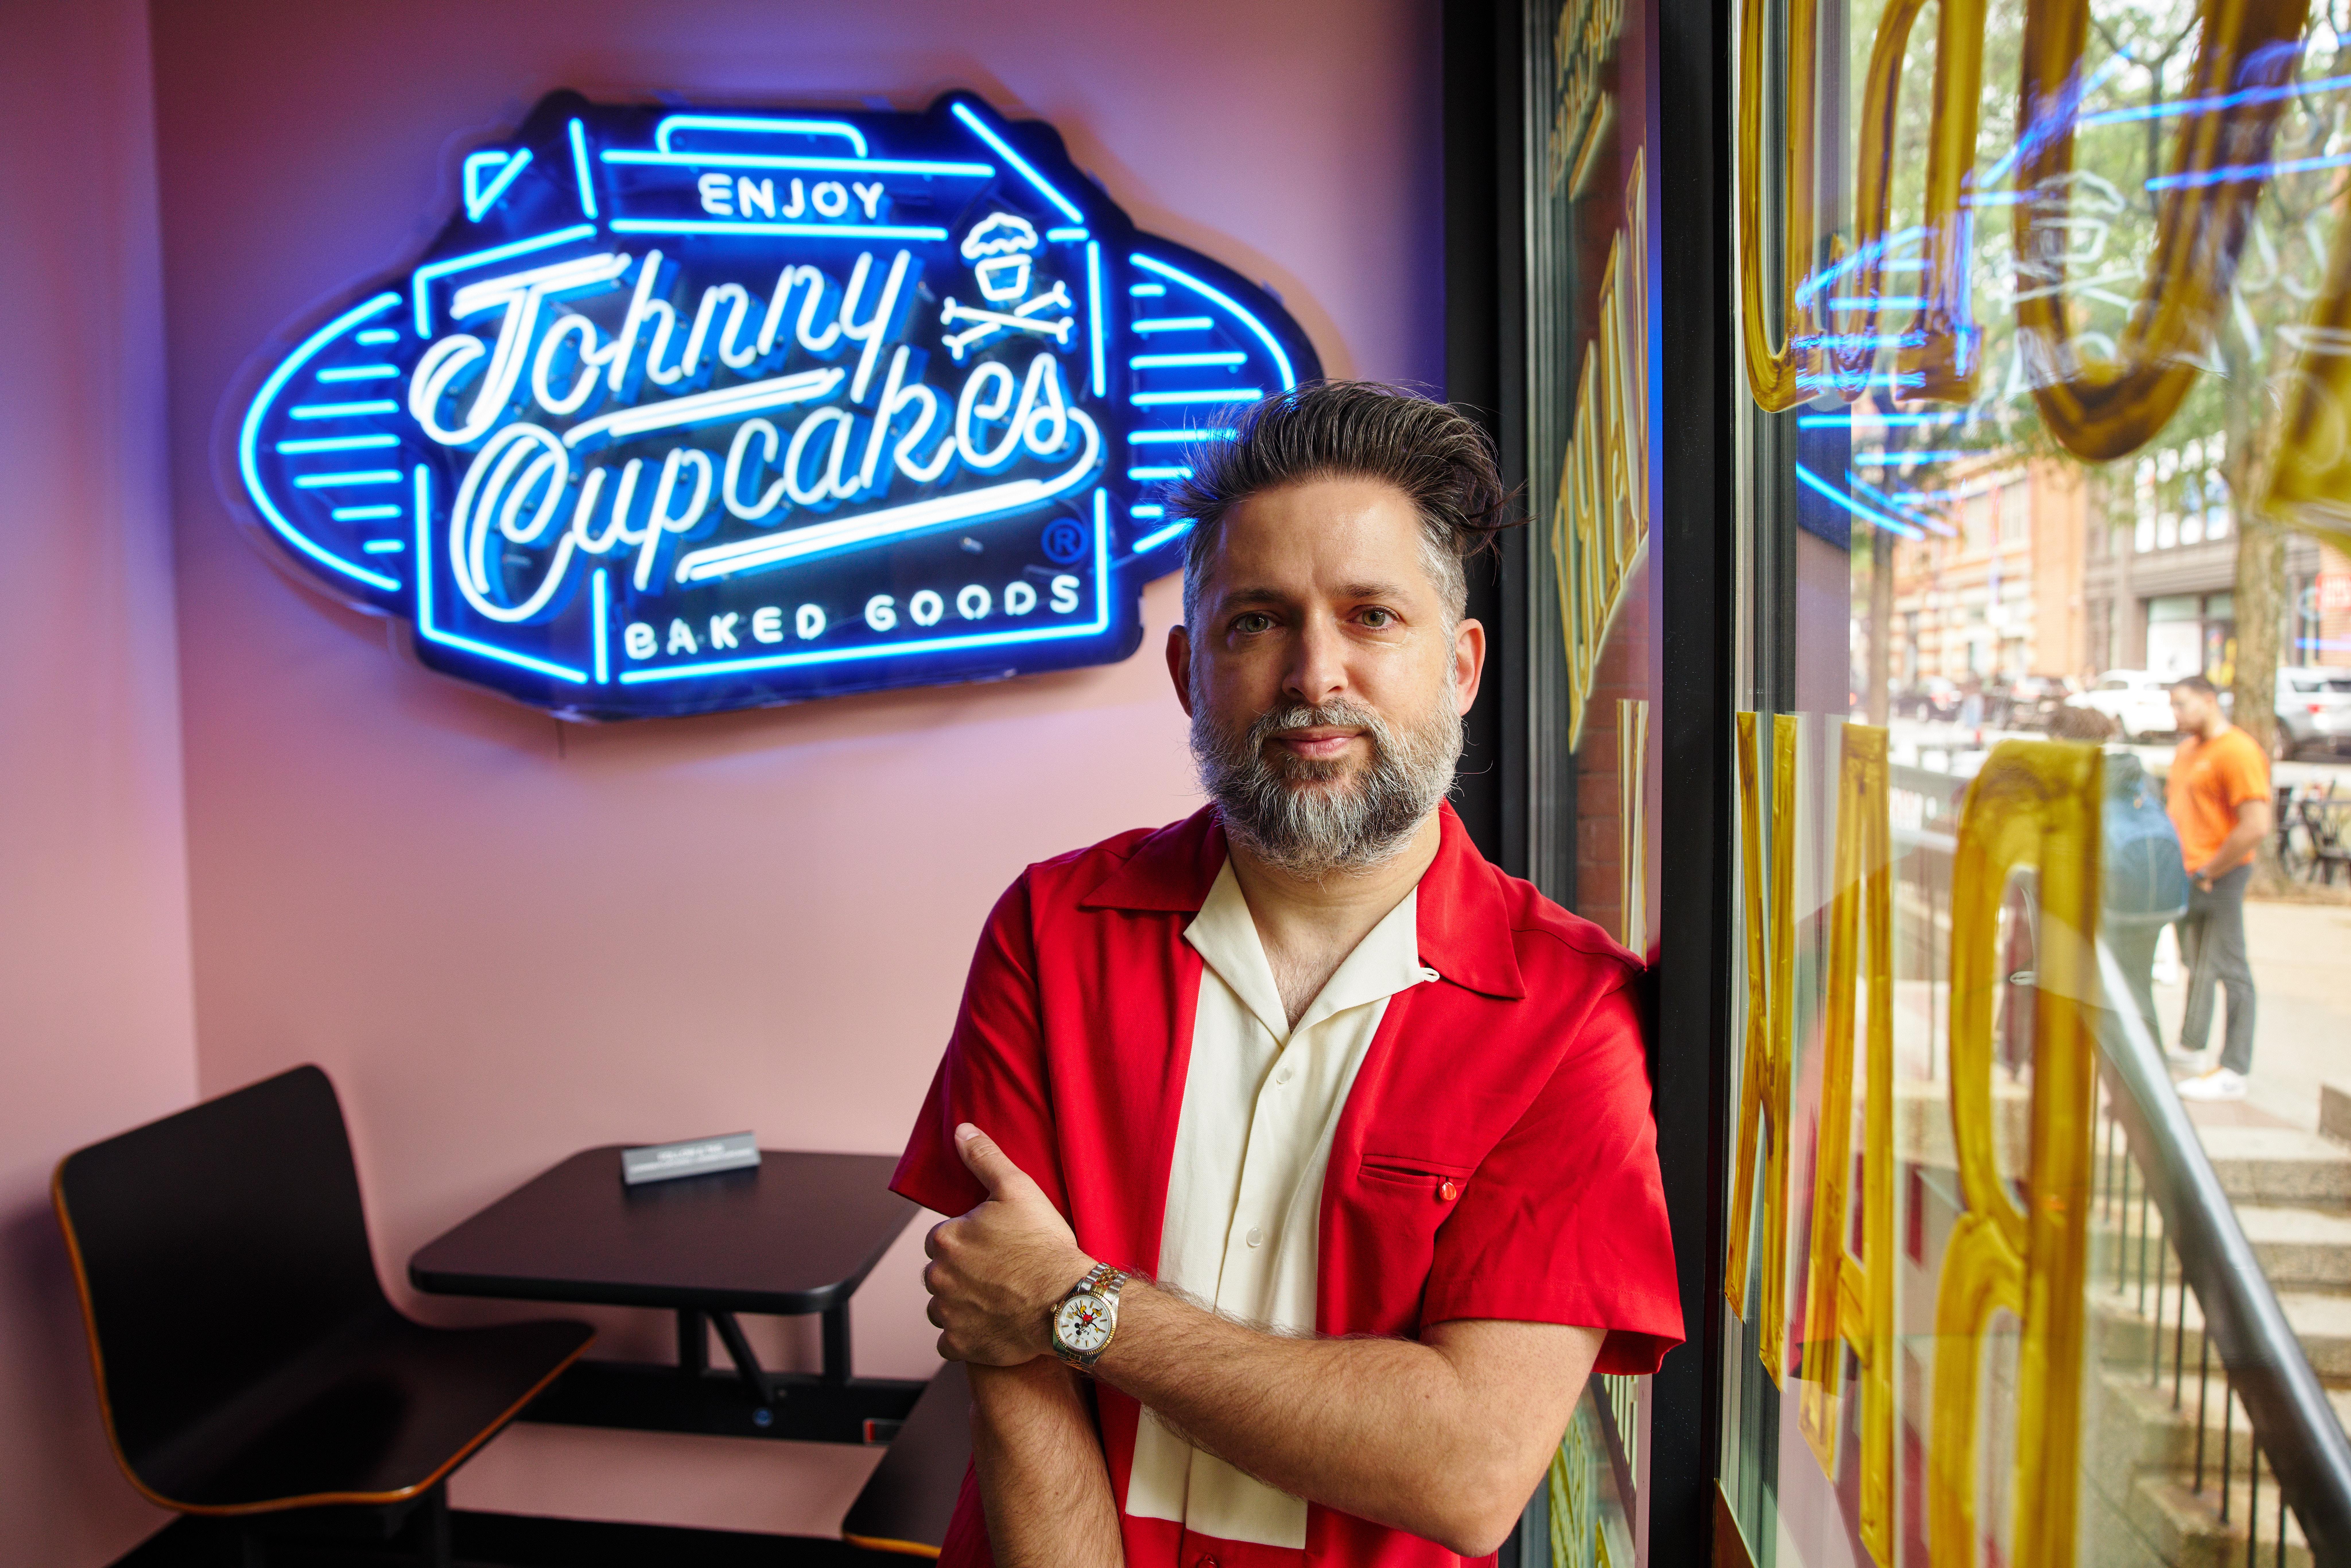 Picture of Johnny Earle with his arm crossed. There is a neon sign in the background that says 'Enjoy Johnny Cupcakes Baked Goods'